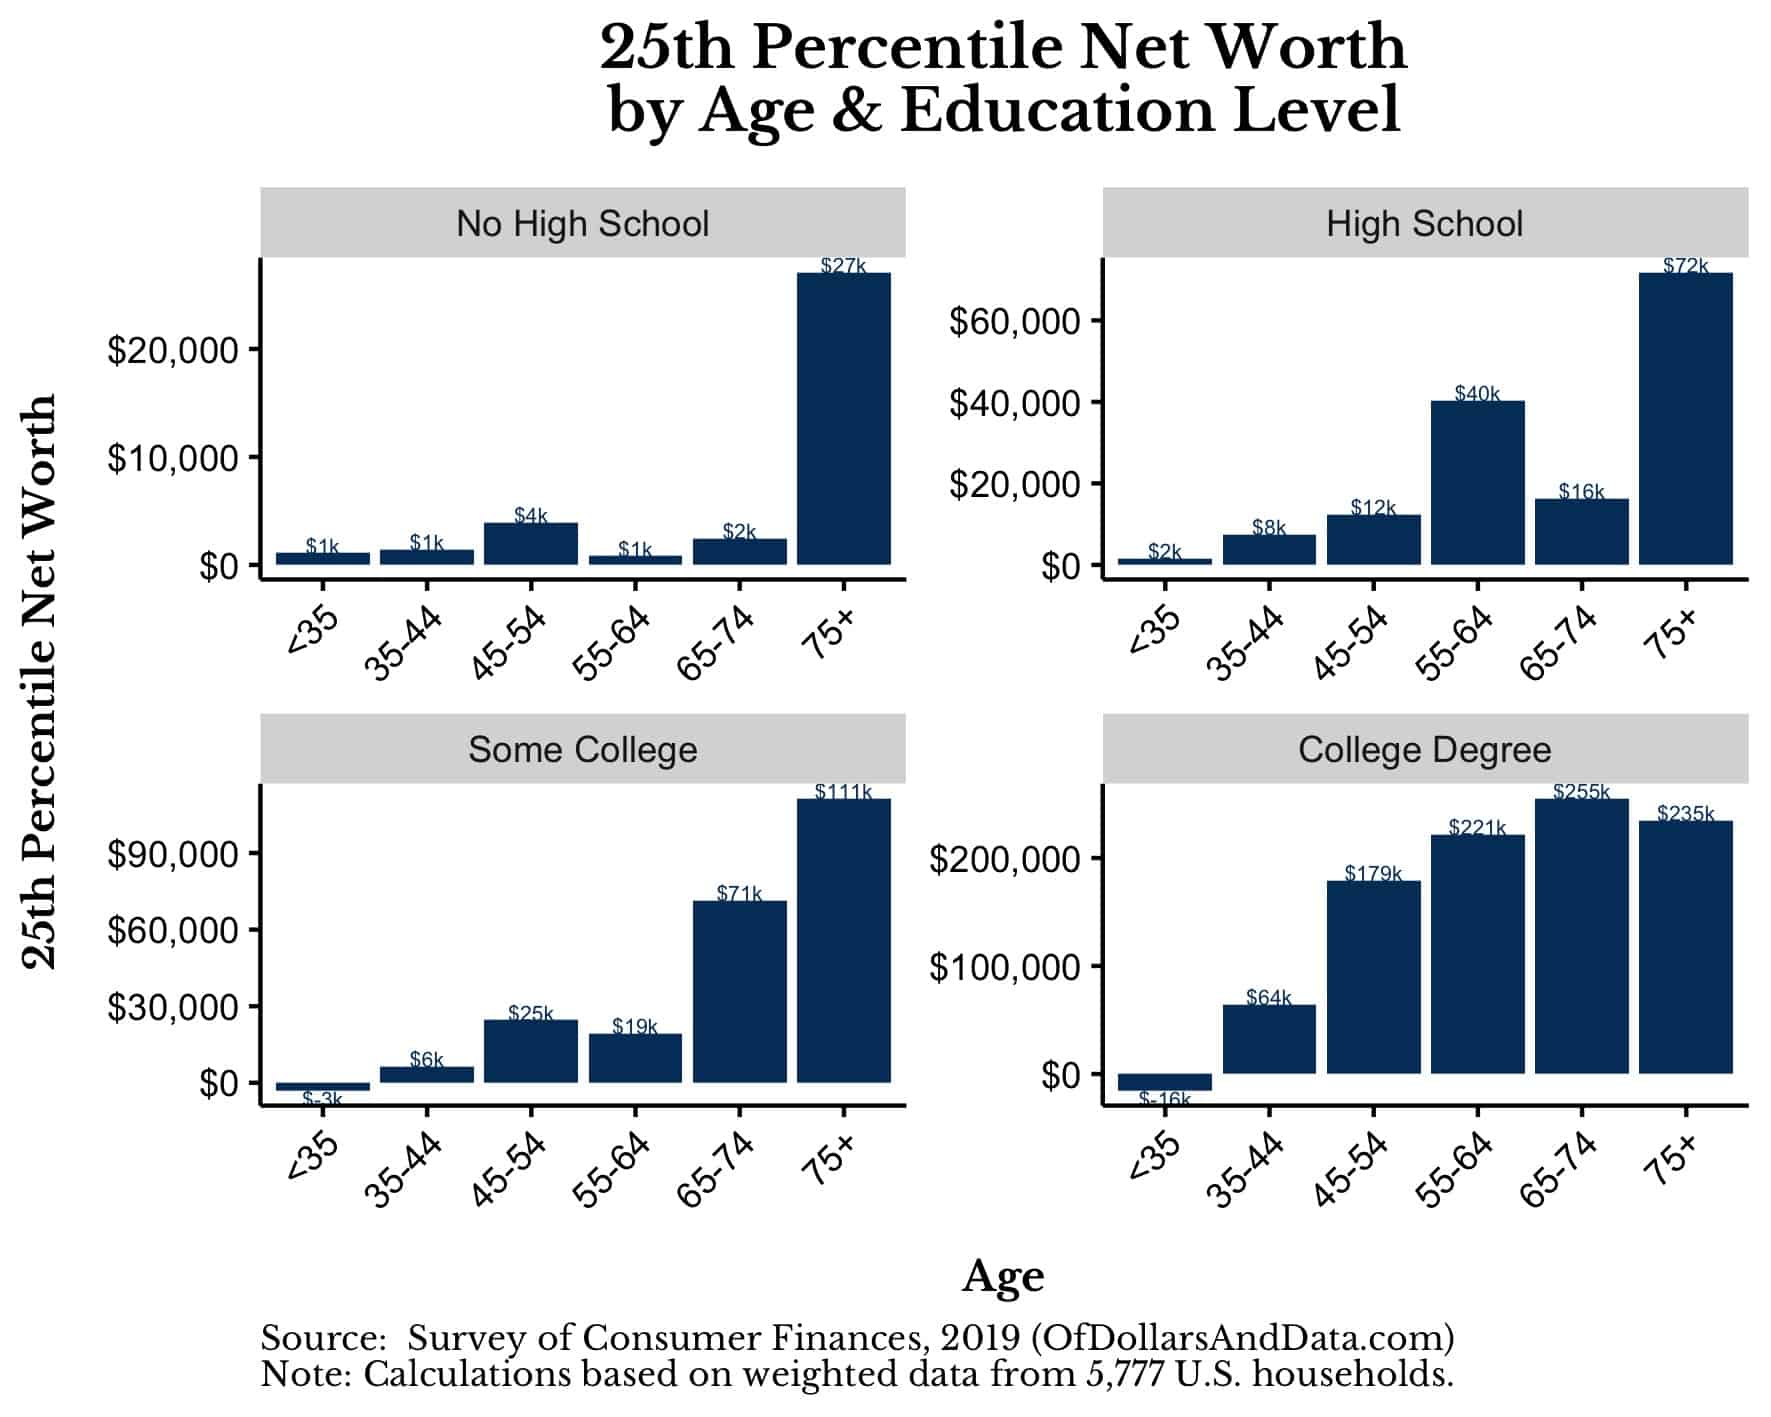 25th percentile net worth by age and education level for the 2019 Survey of Consumer Finances